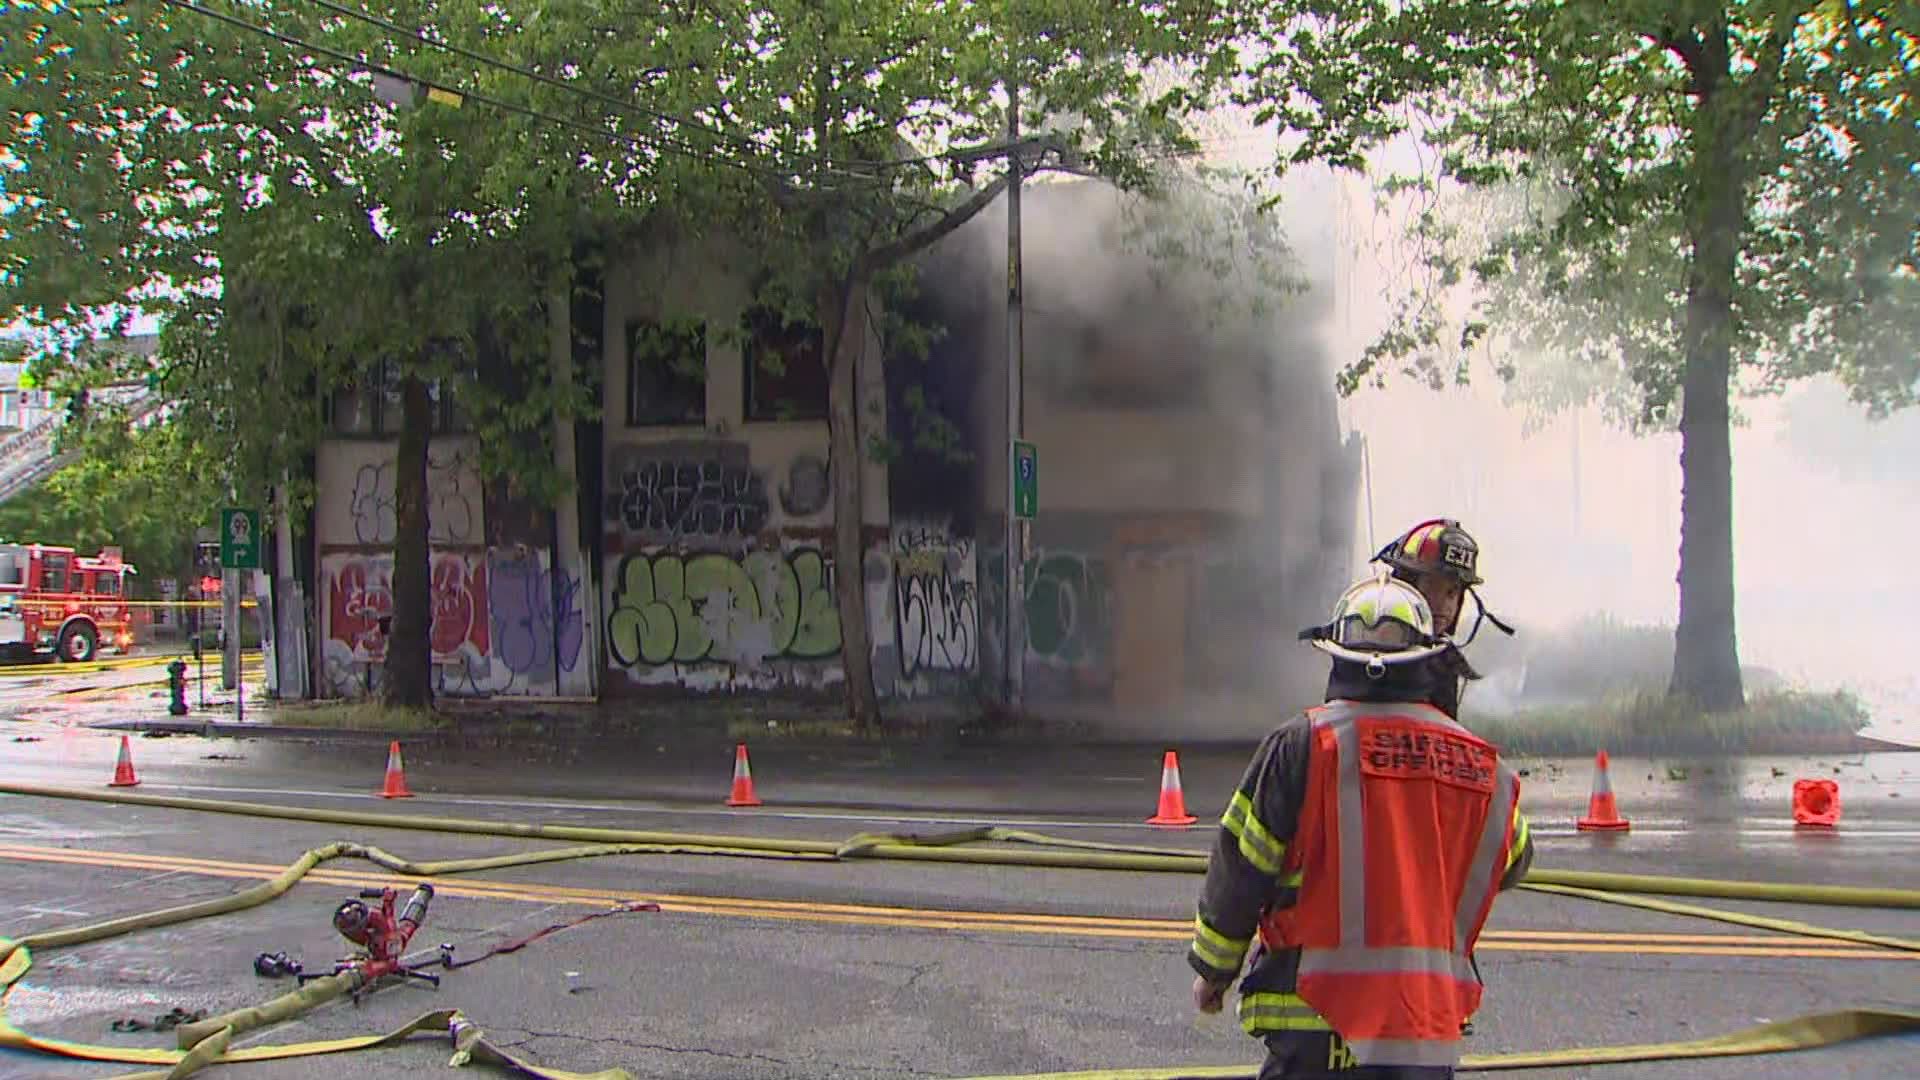 The fire broke out in what used to be the Polly Esther's Culture Club, an old nightclub in Seattle.